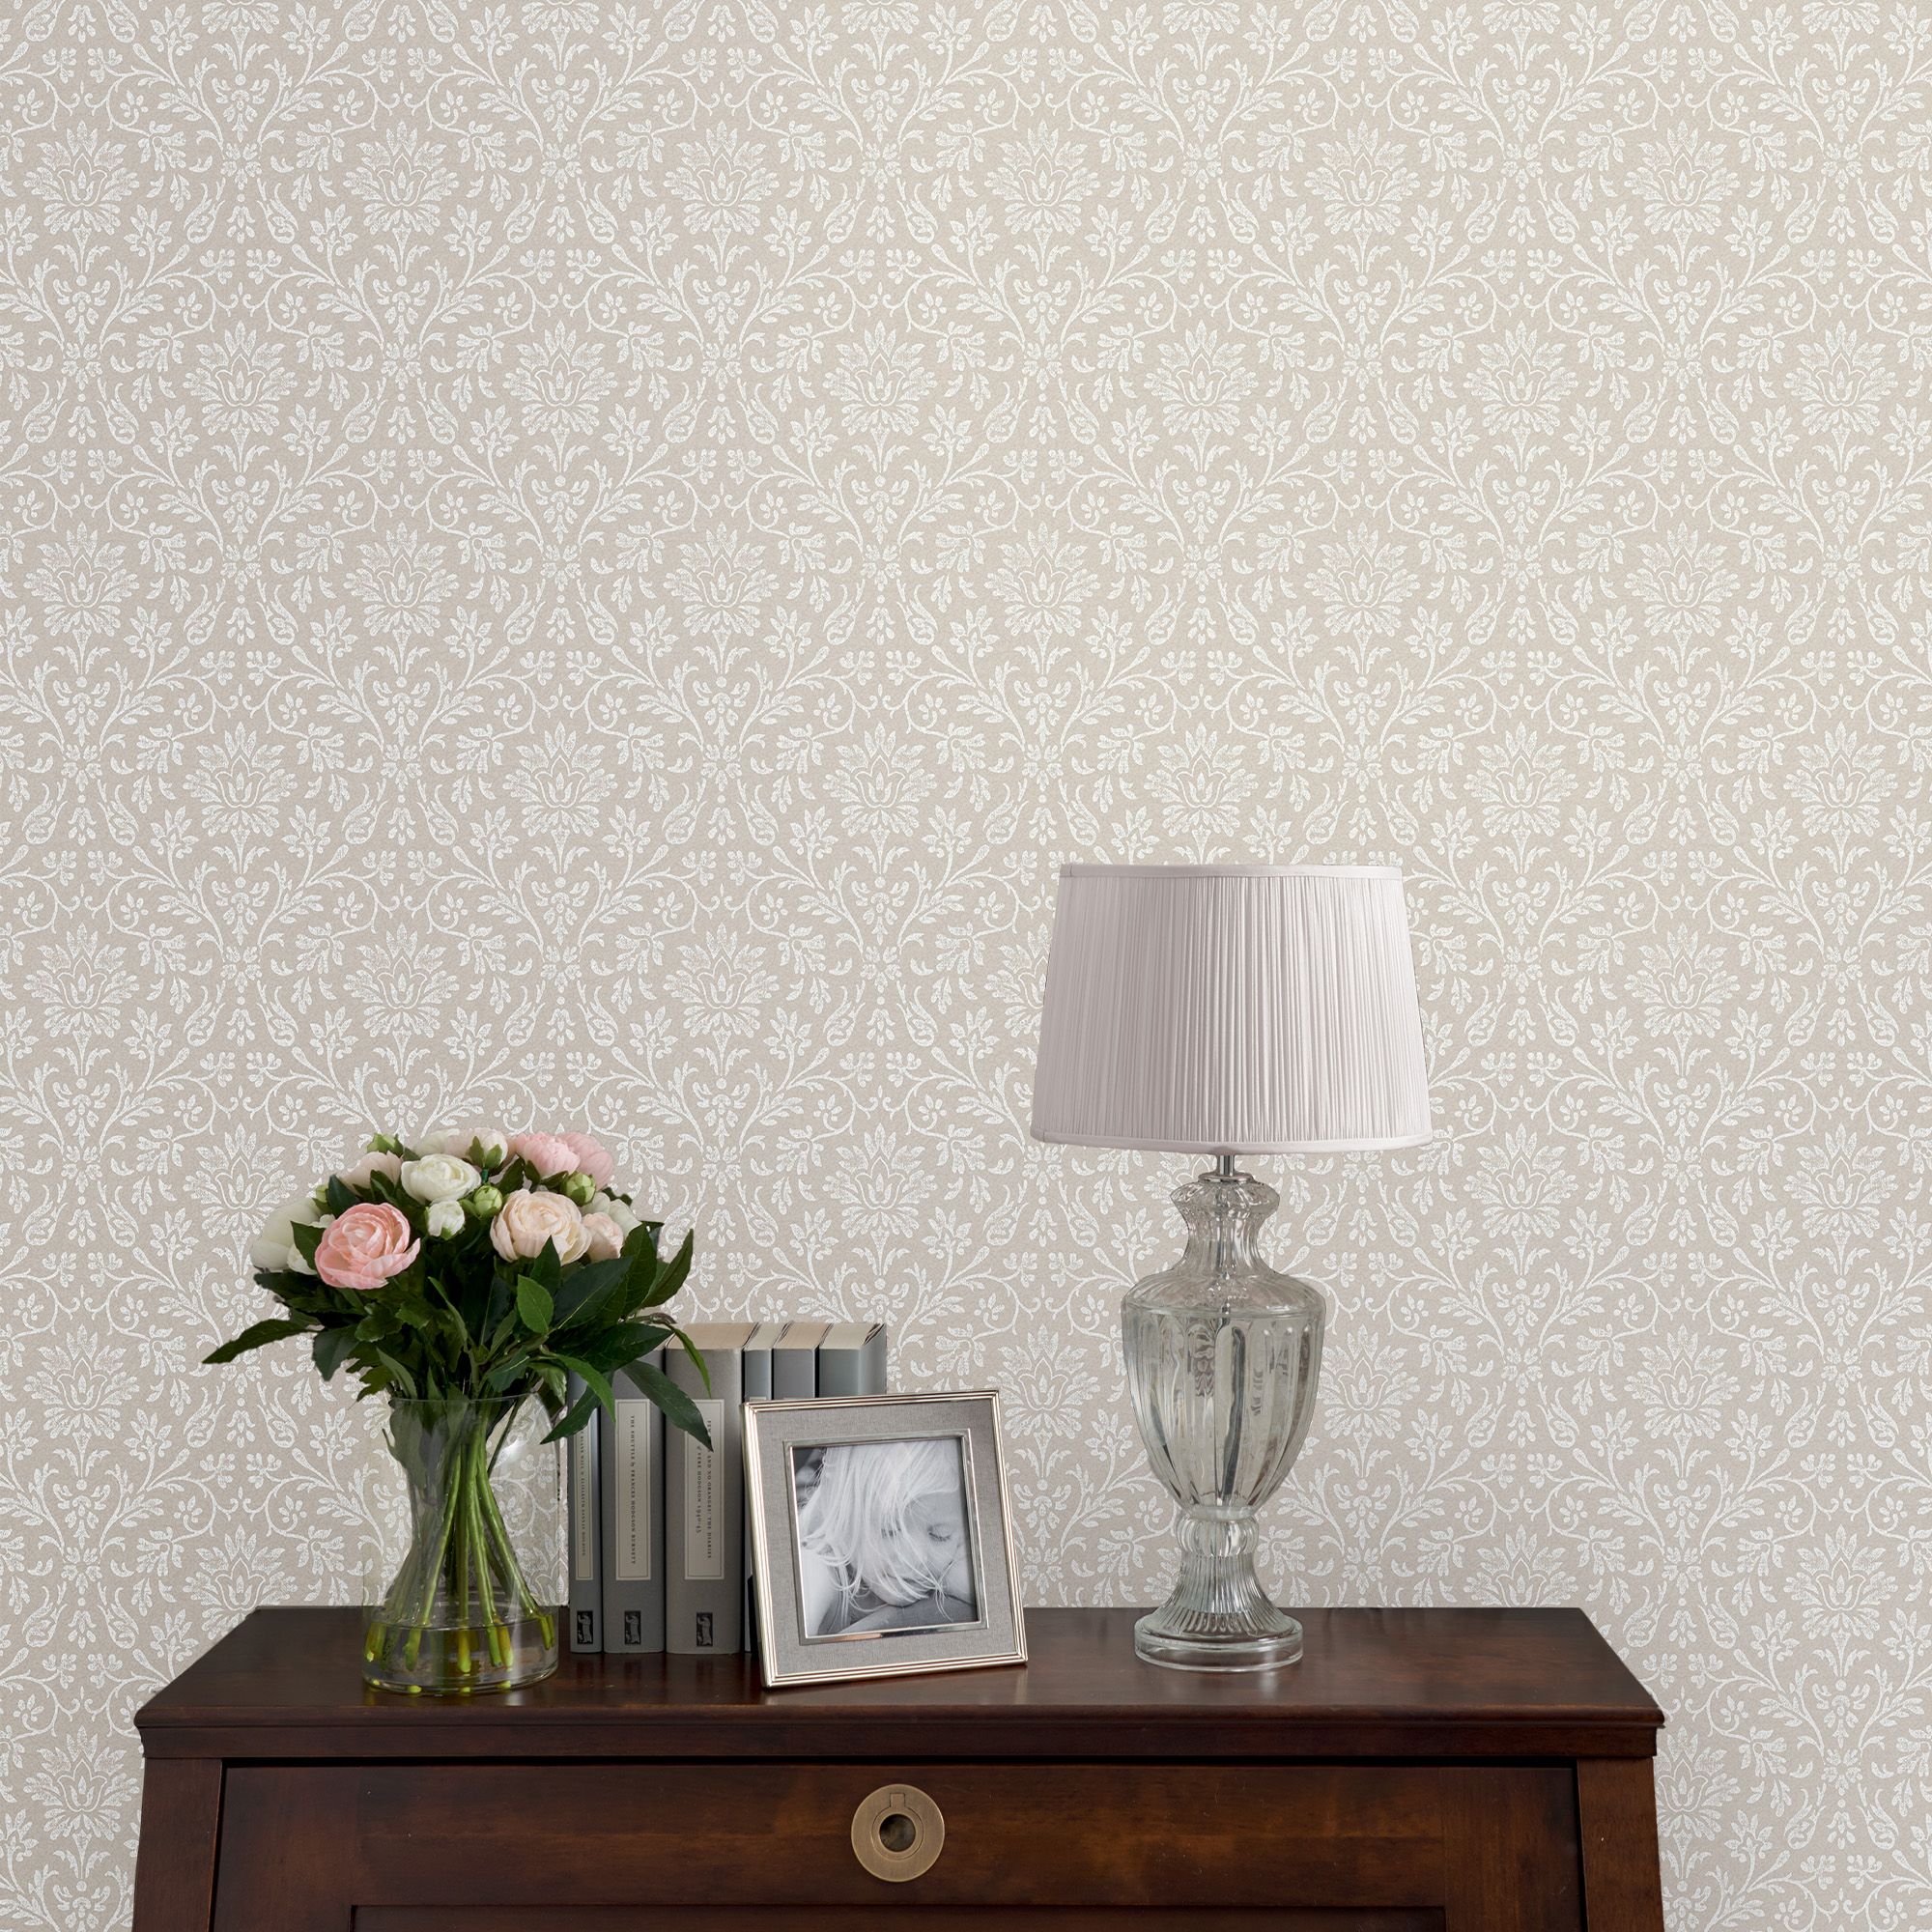 Laura Ashley Annecy Dove grey Damask Smooth Wallpaper Sample